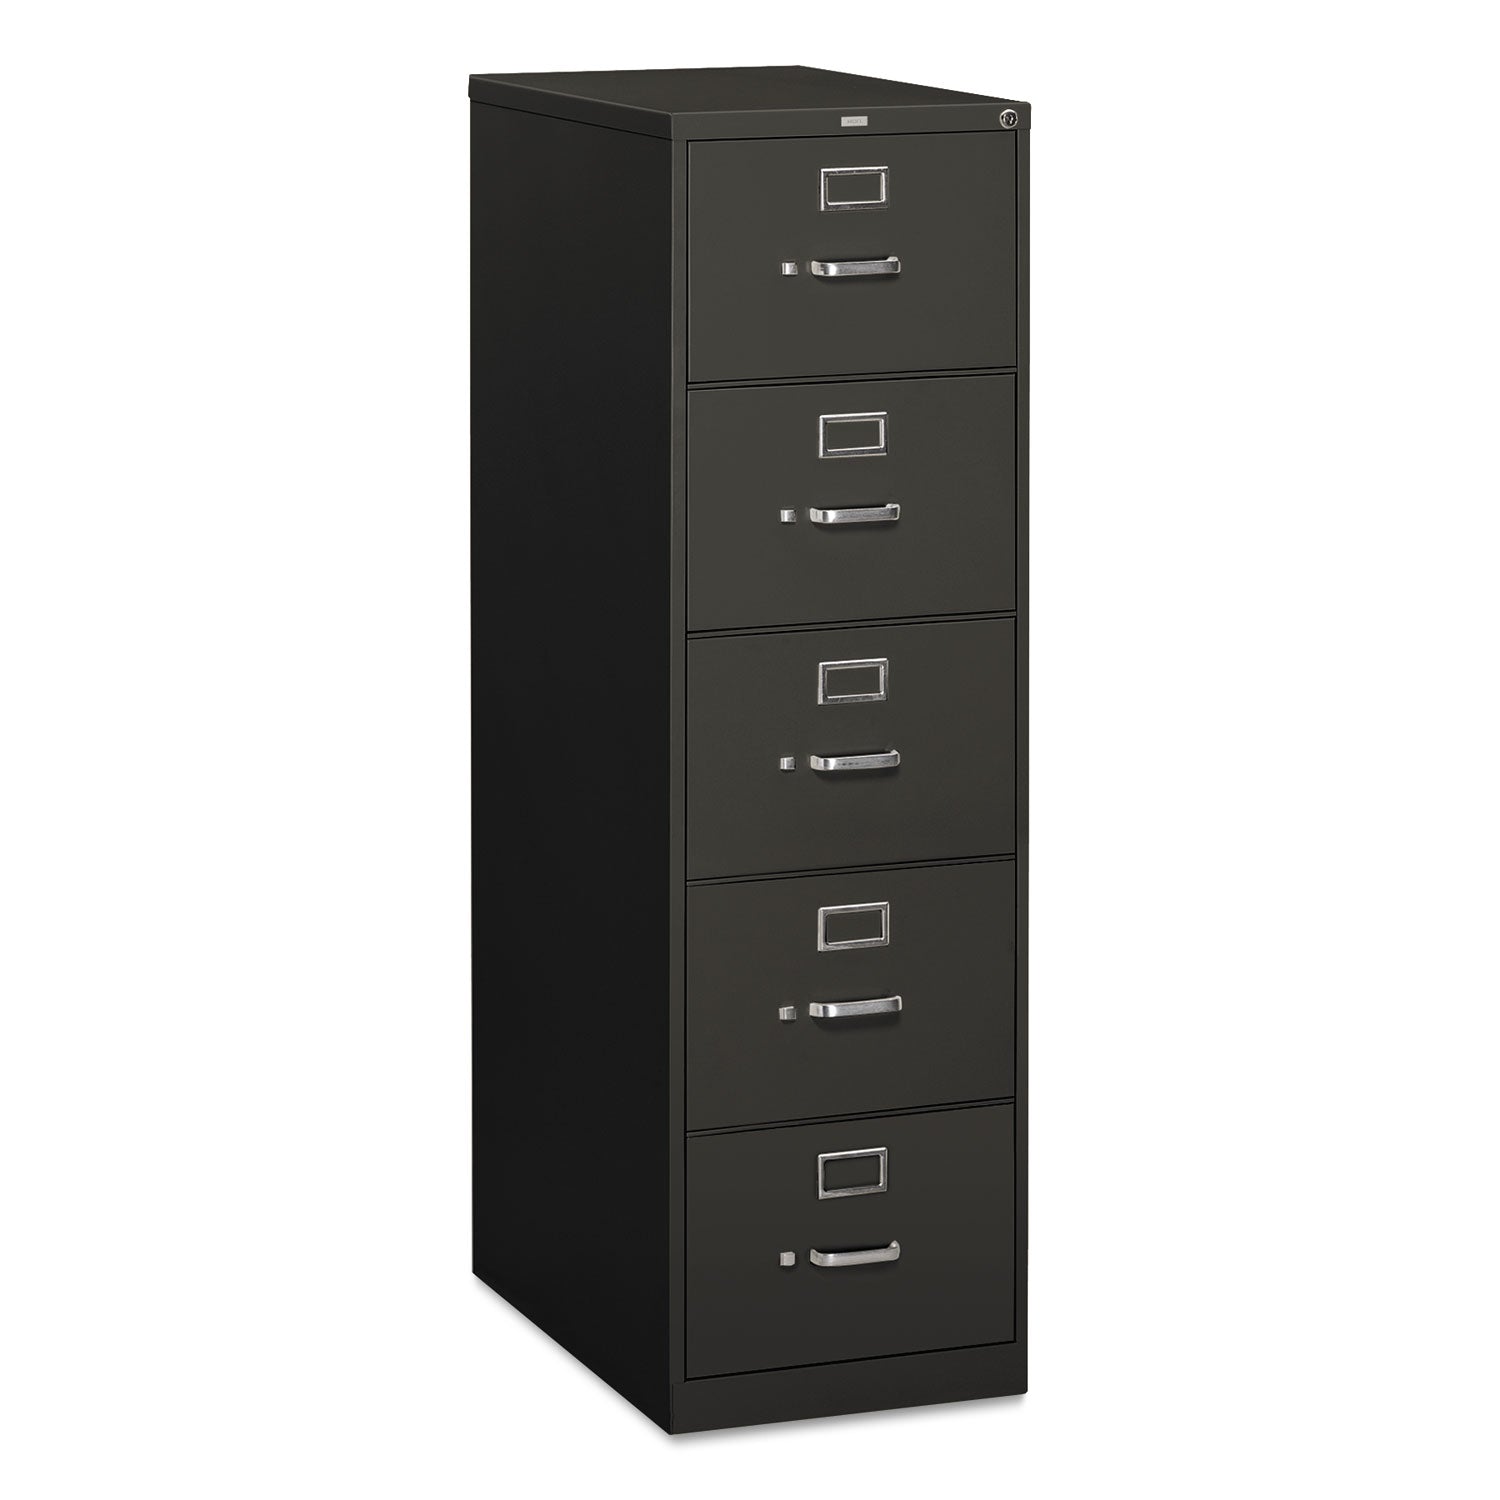 310 Series Vertical File, 5 Legal-Size File Drawers, Charcoal, 18.25" x 26.5" x 60 - 